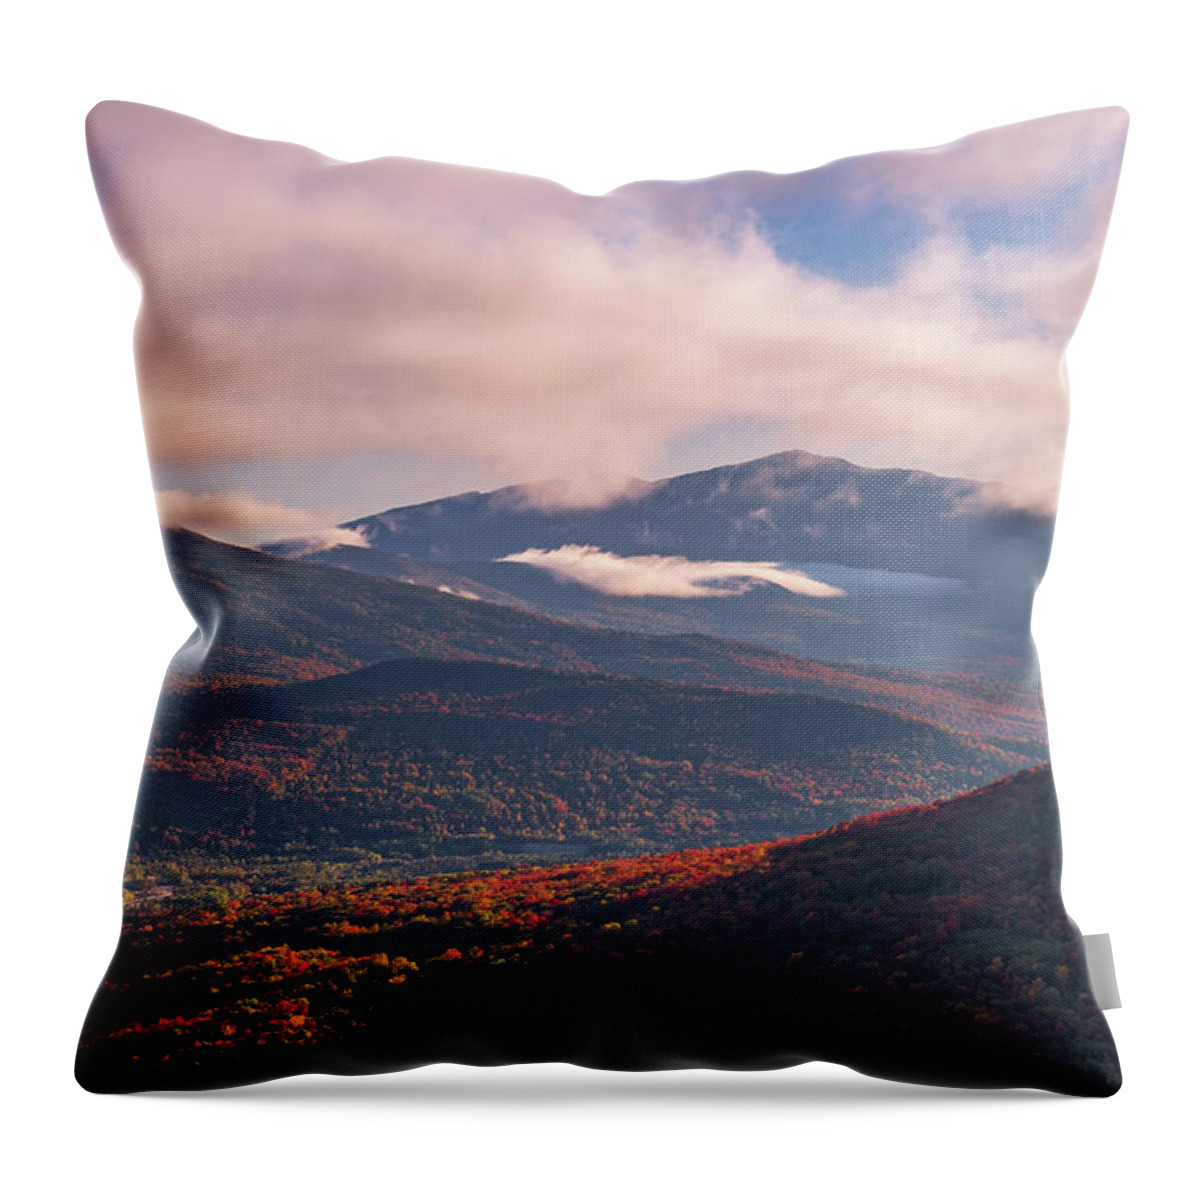 New Hampshire Throw Pillow featuring the photograph Autumn Morning In The Zealand Valley by Jeff Sinon